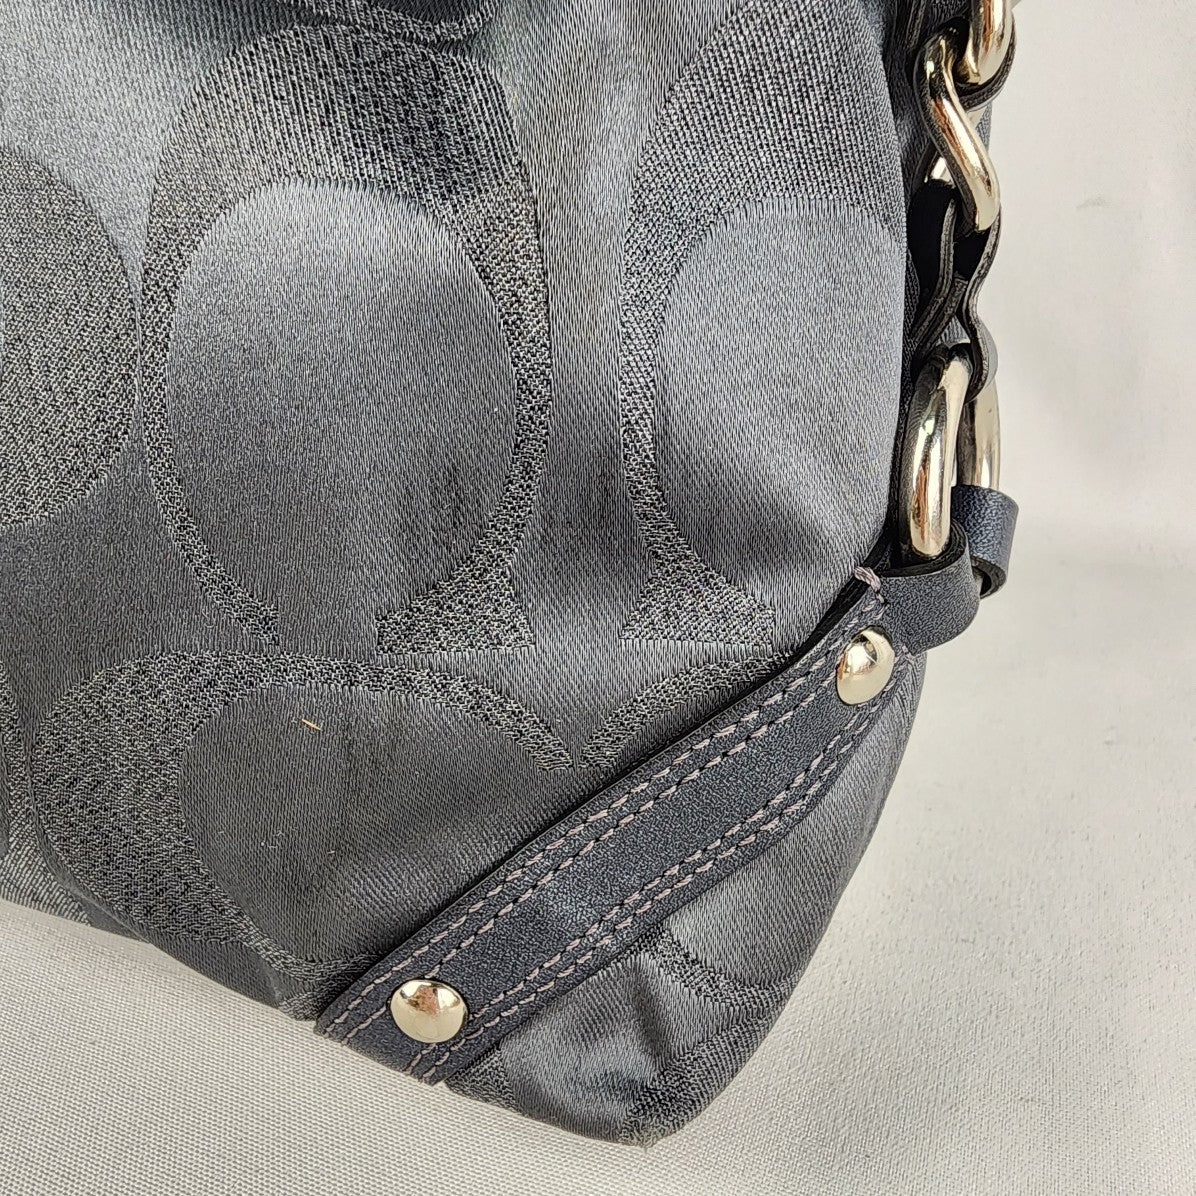 Coach Carly Sateen Grey Leather Trimmed Monogram Shoulder Purse